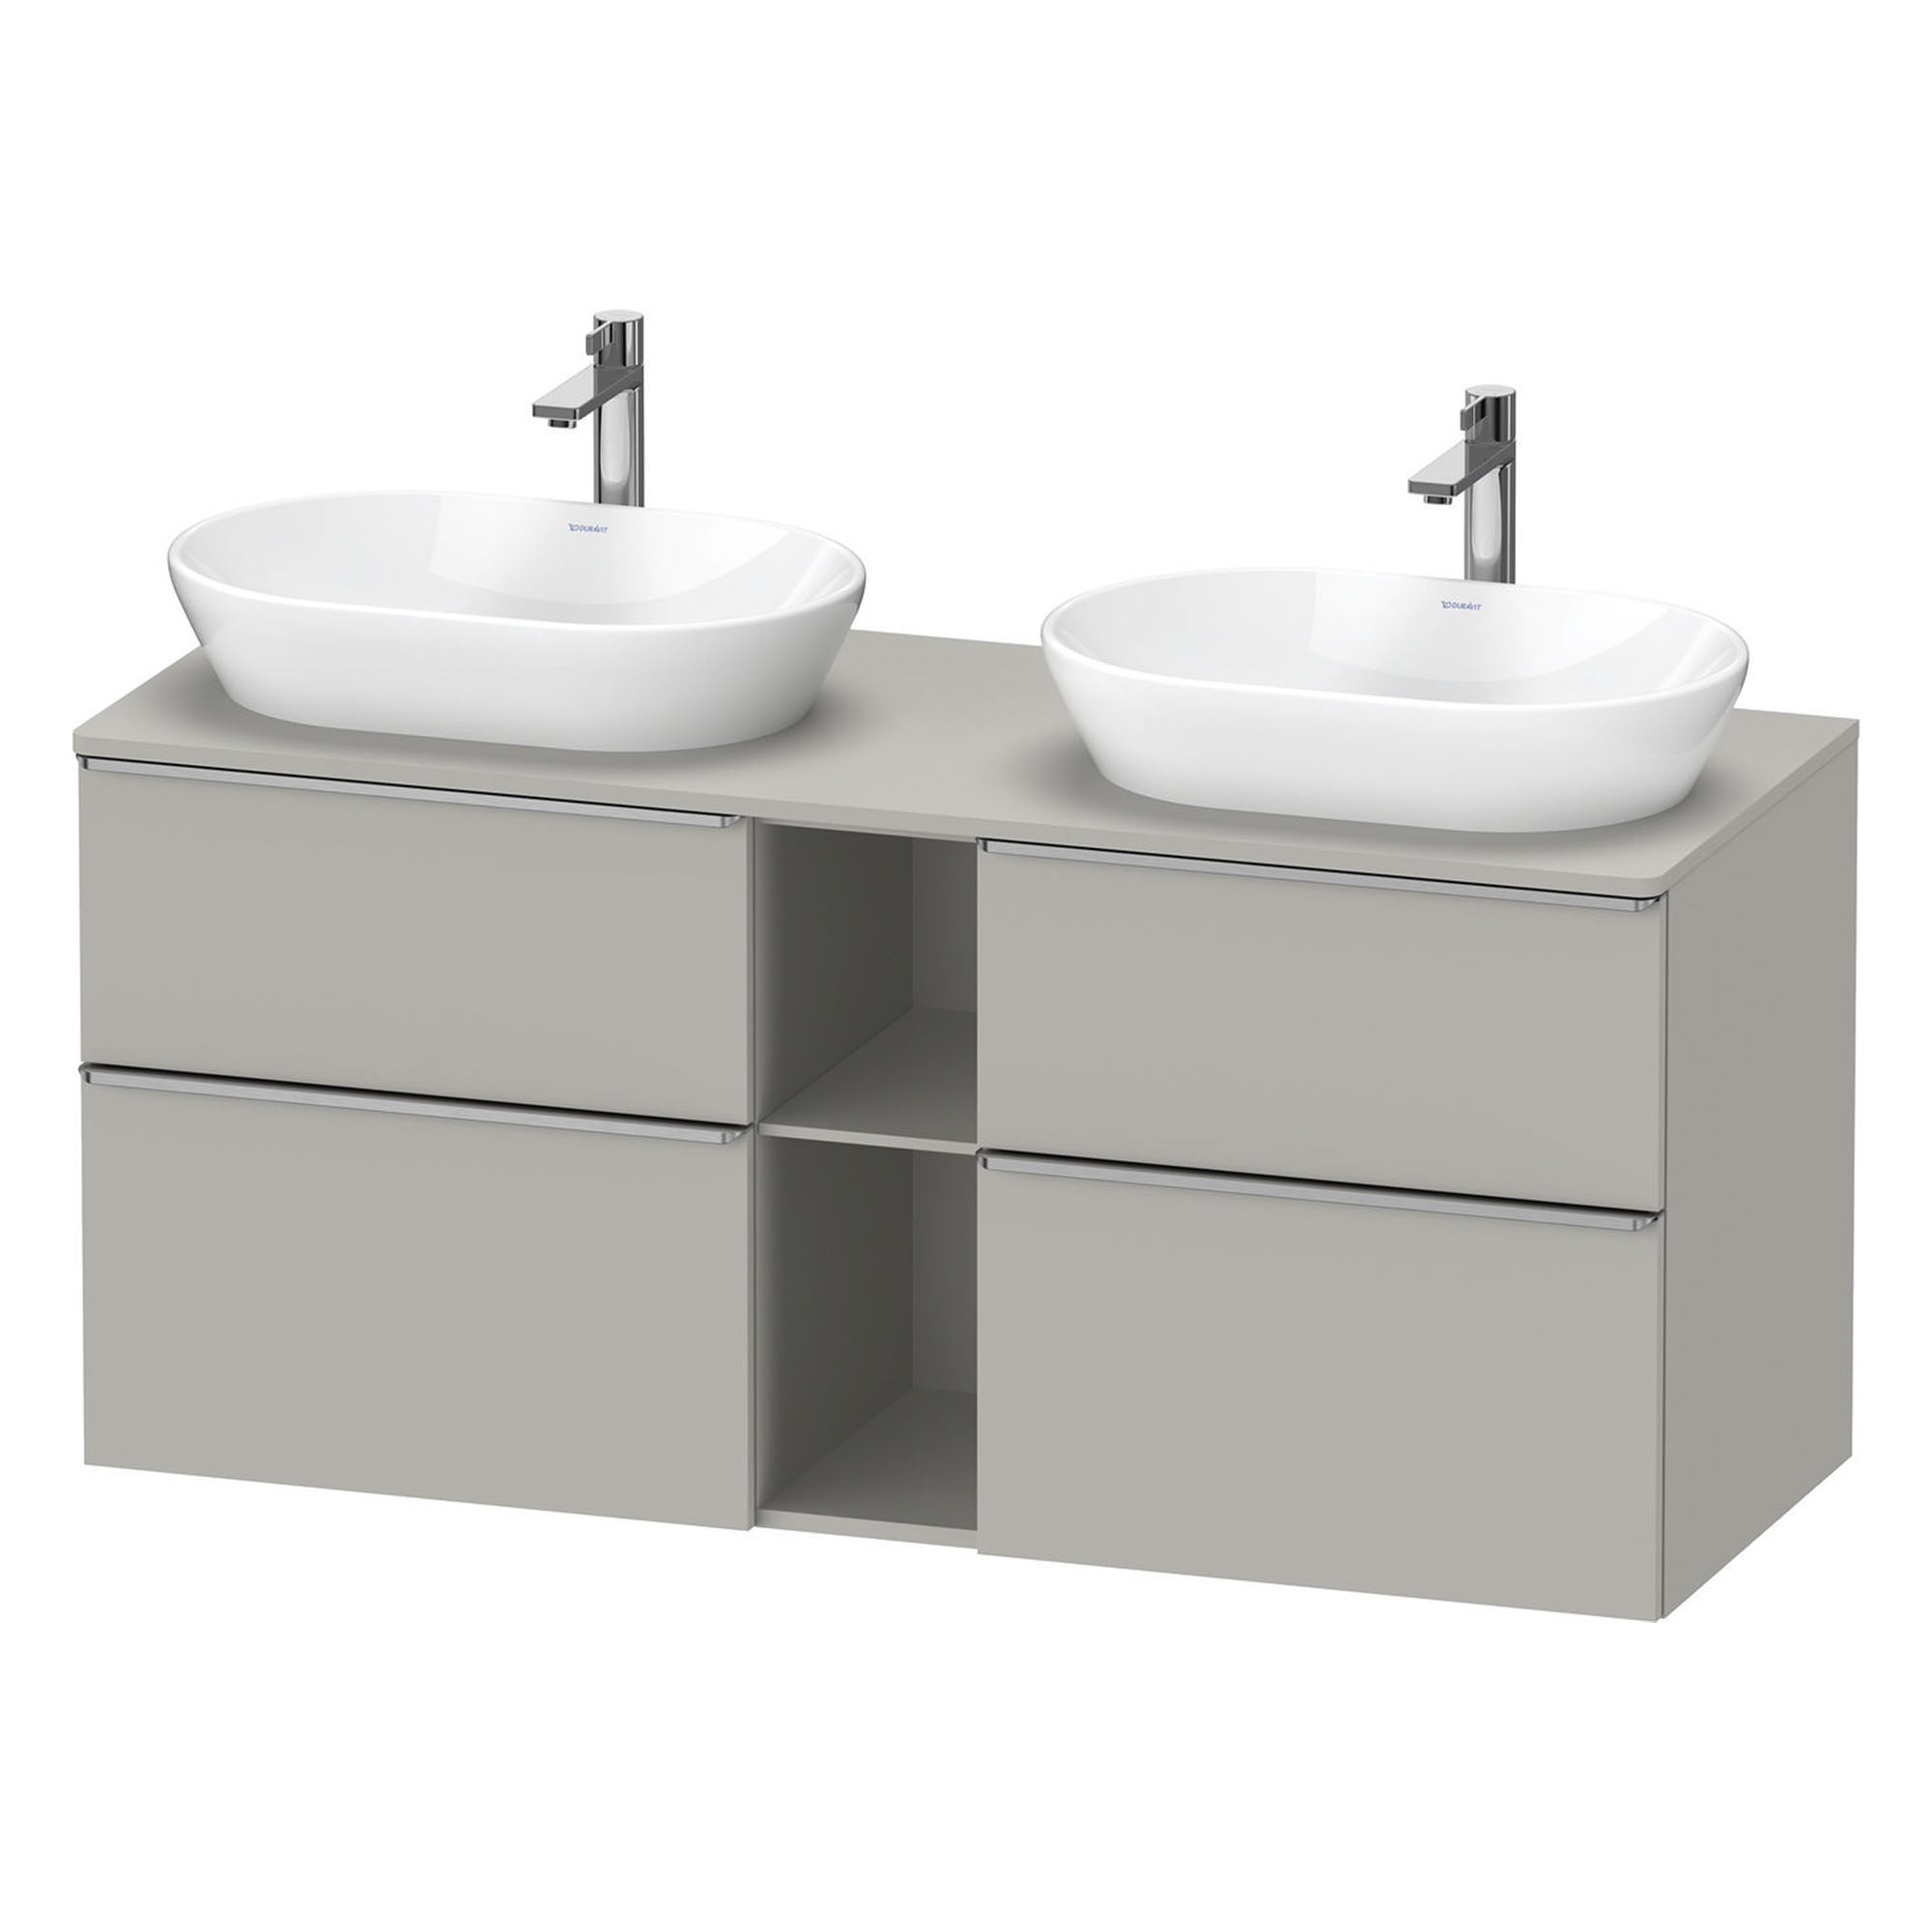 duravit d-neo 1400 wall mounted vanity unit with worktop 2 open shelves concrete grey stainless steel handles